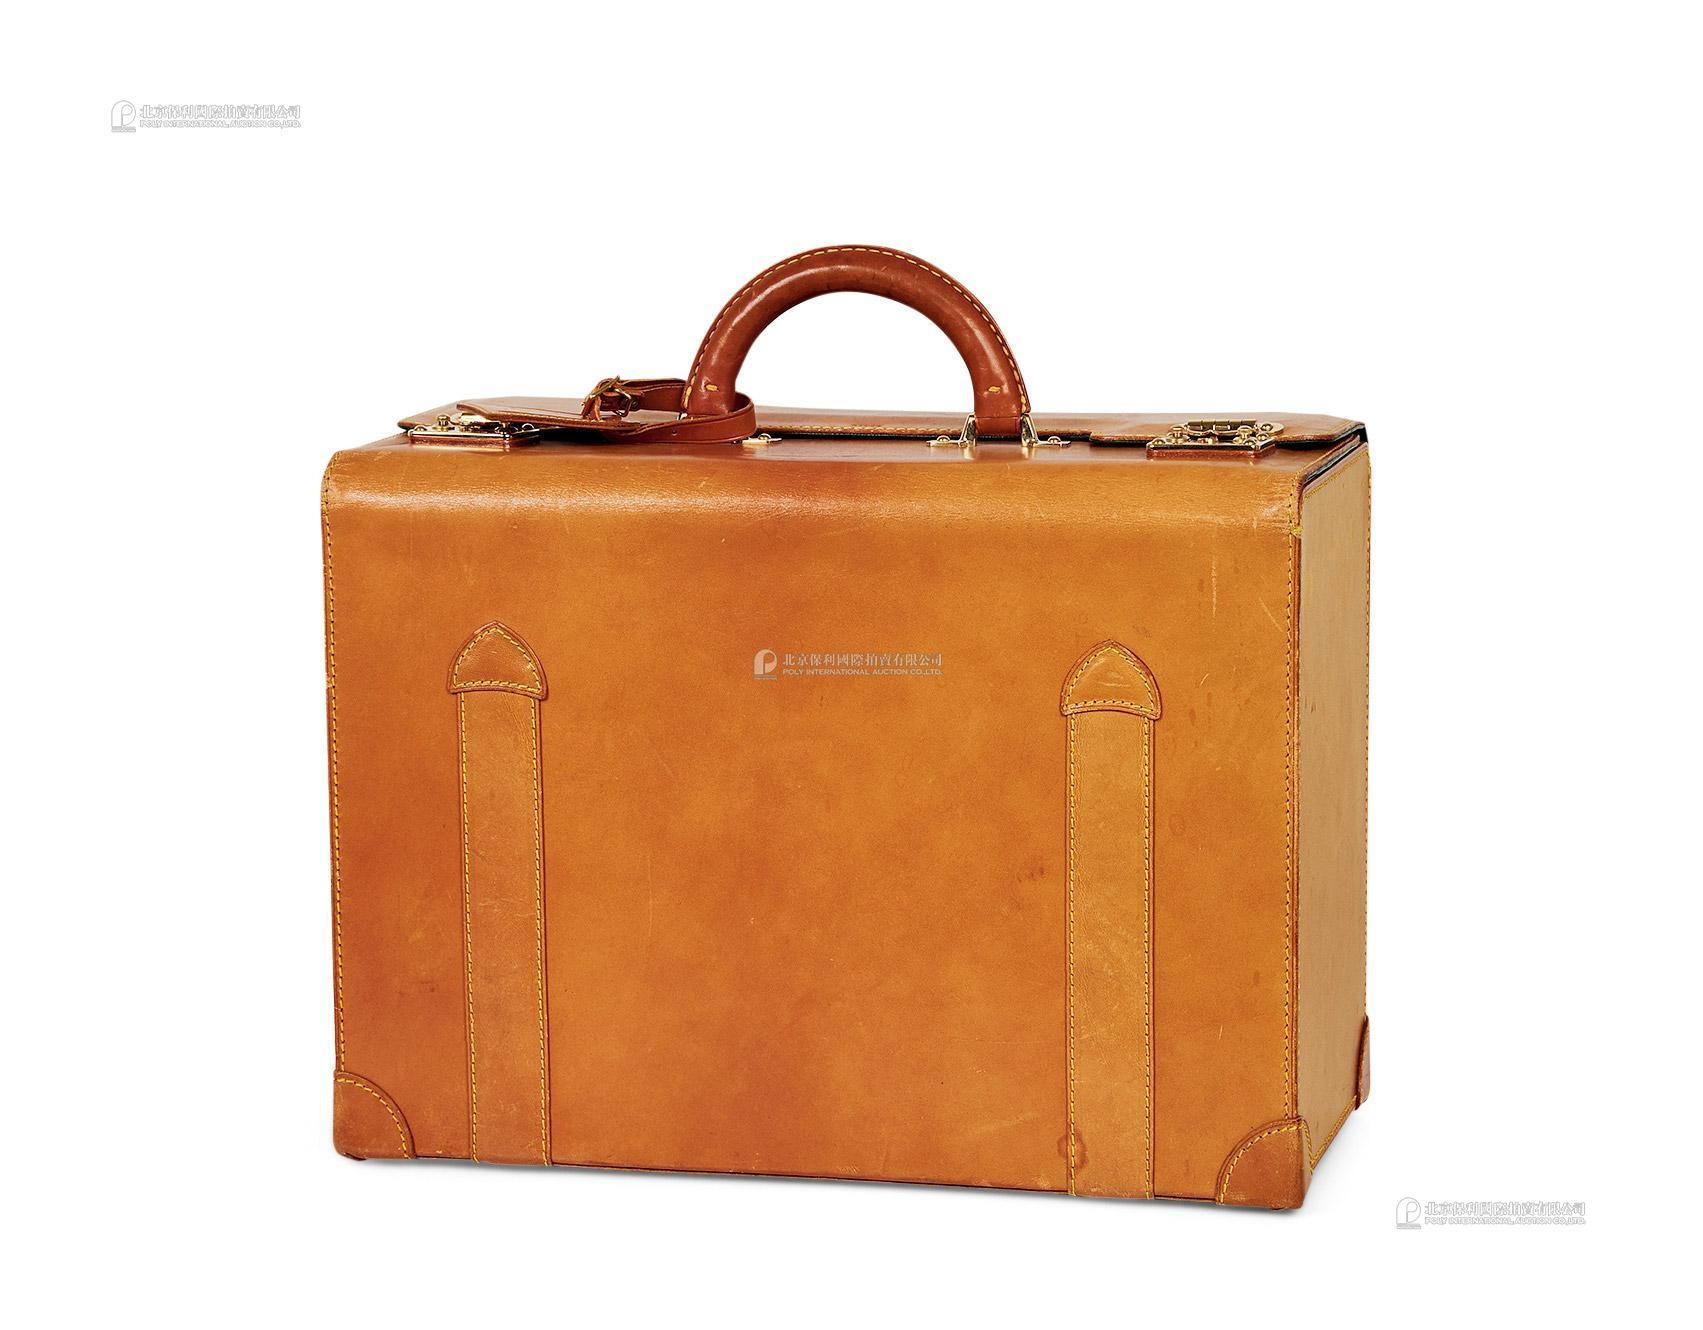 LOUIS VUITTON　A LOUIS VUITTON LEATHER SUITCASE WITH BRASS HARDWARE